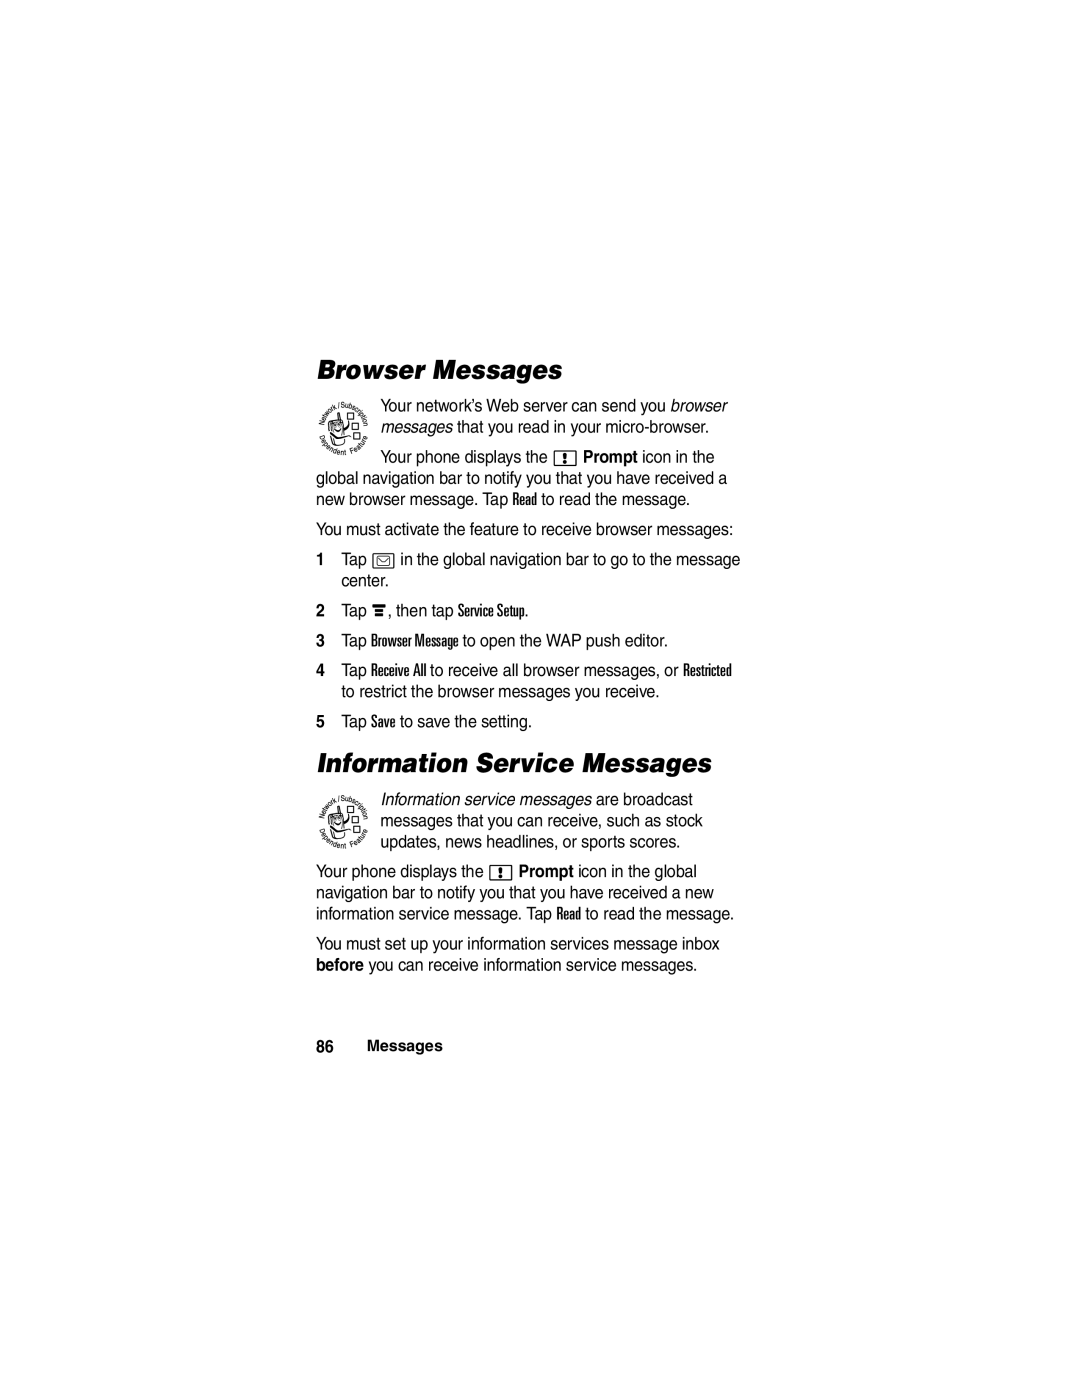 Motorola A780 manual Browser Messages, Information Service Messages 